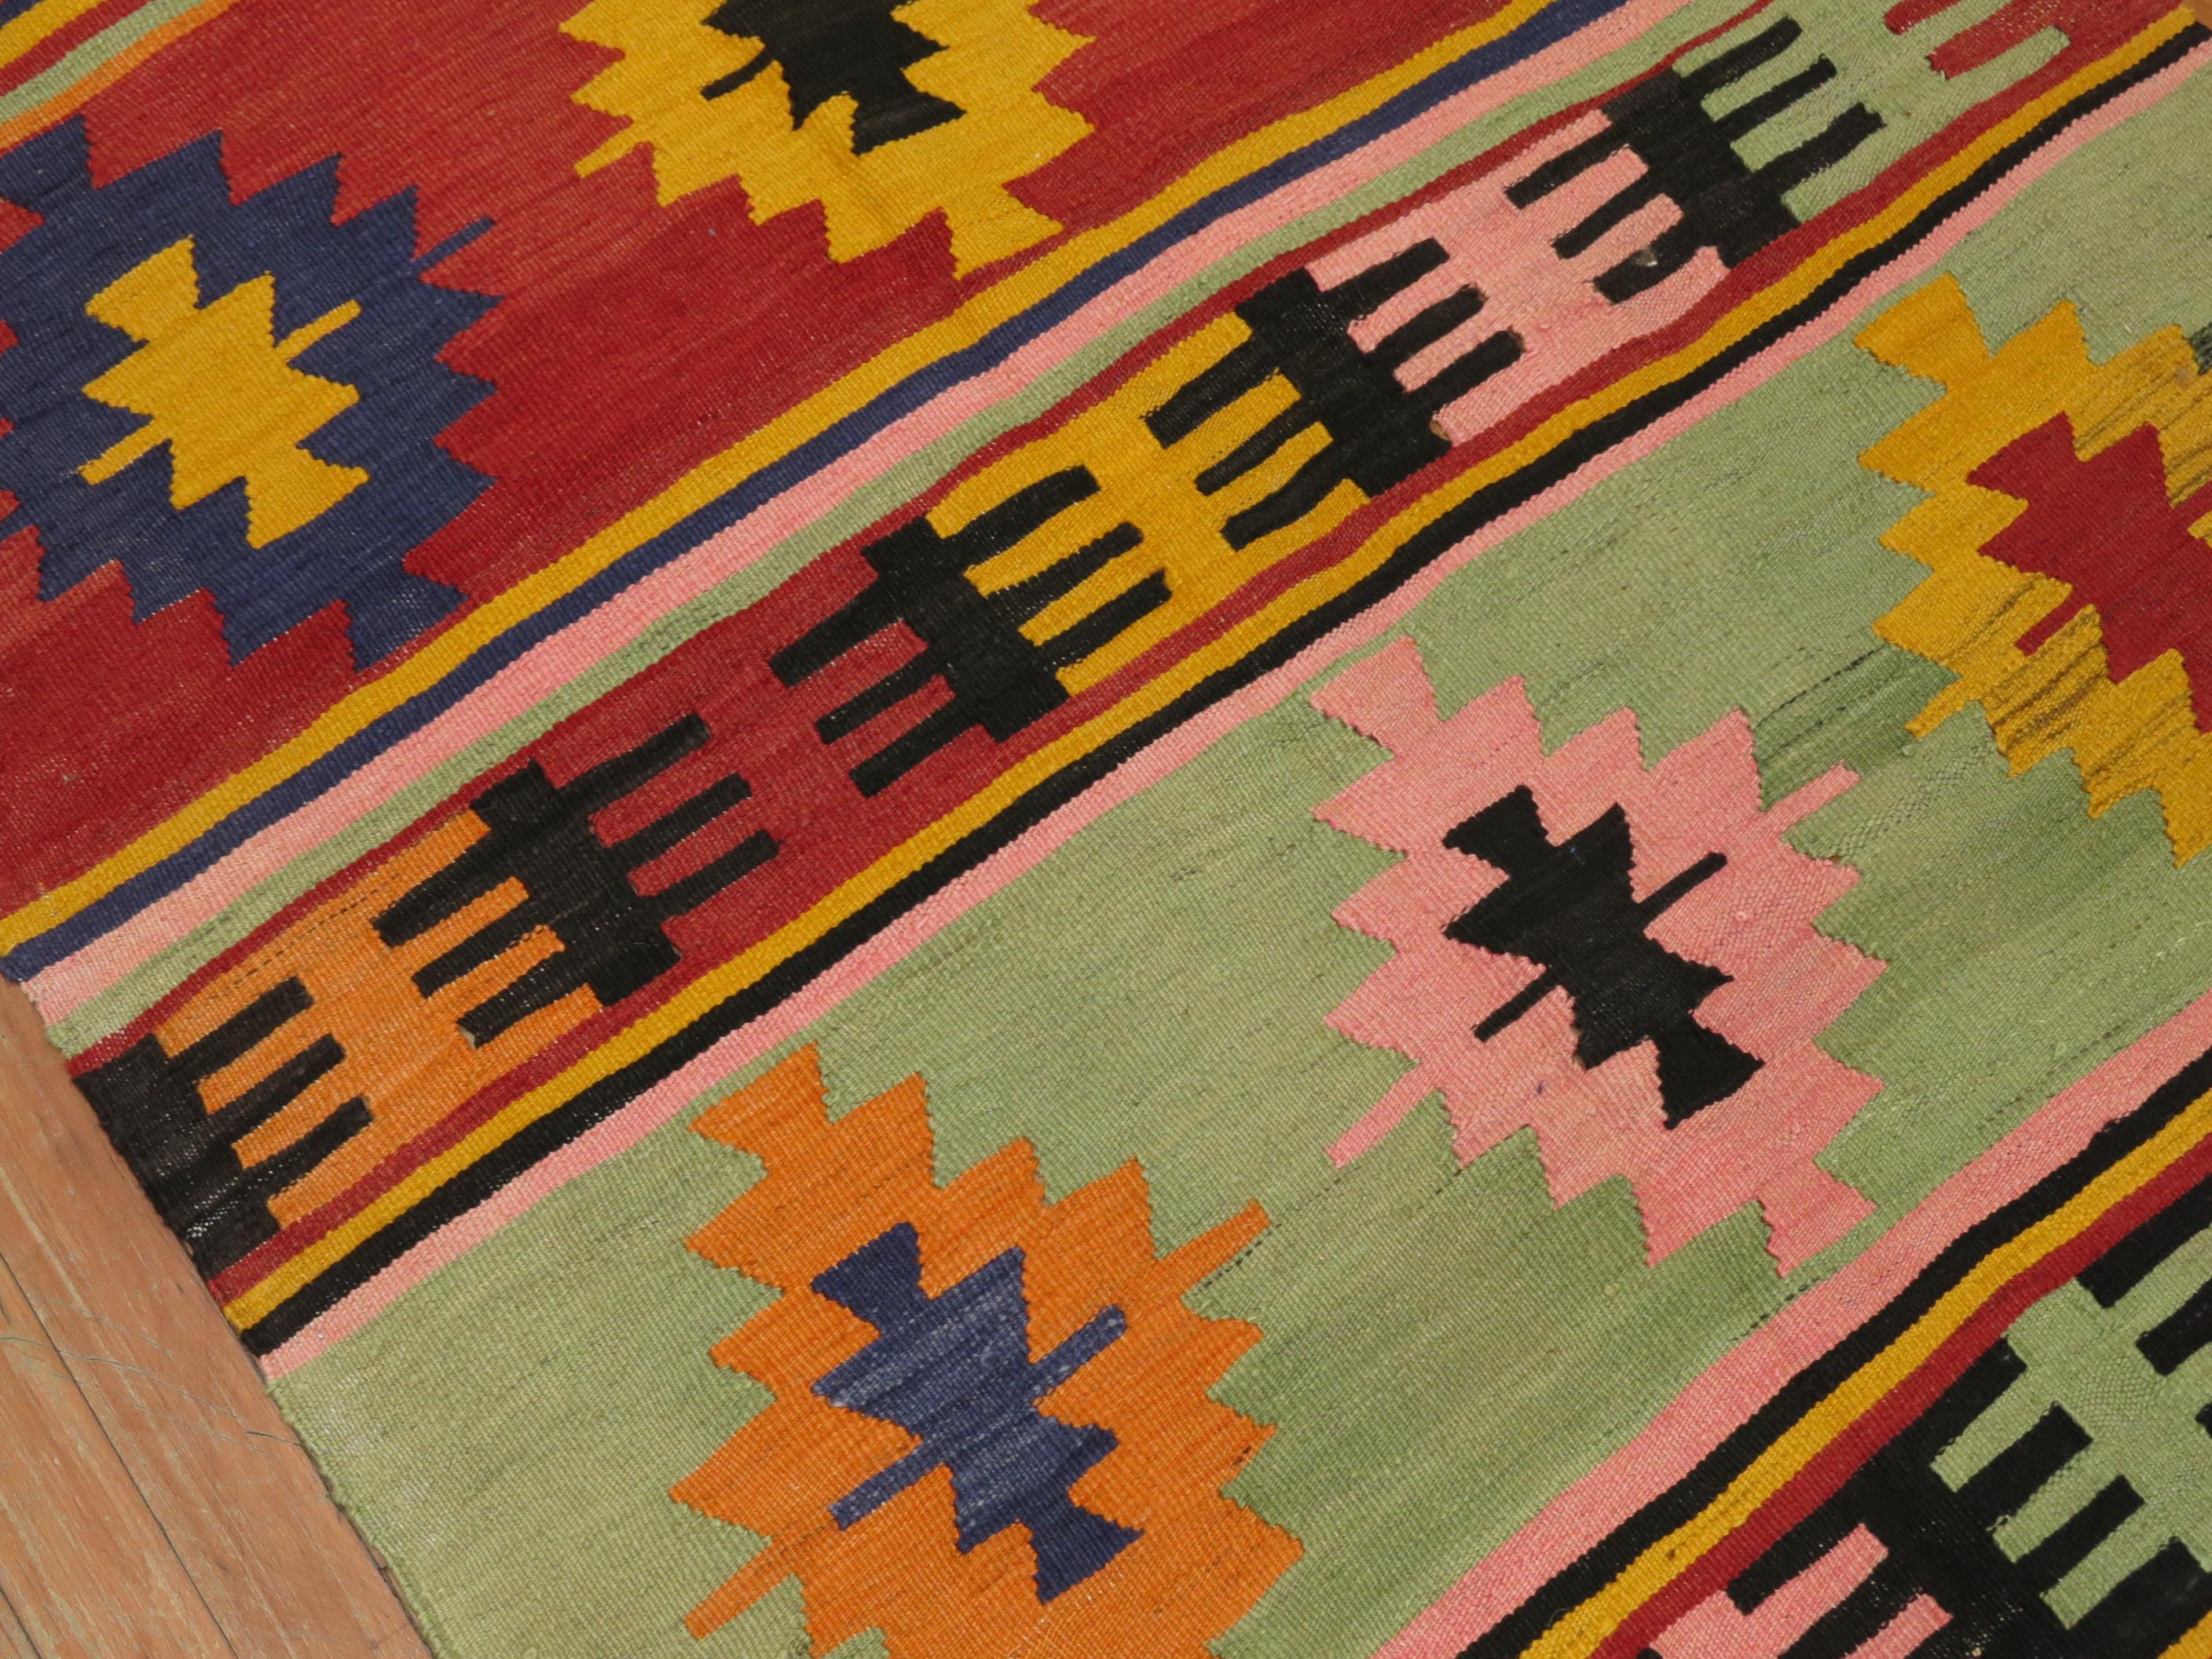 Turkish Kilim from the mid-20th century with an array of bright colors.

Measures: 3'4